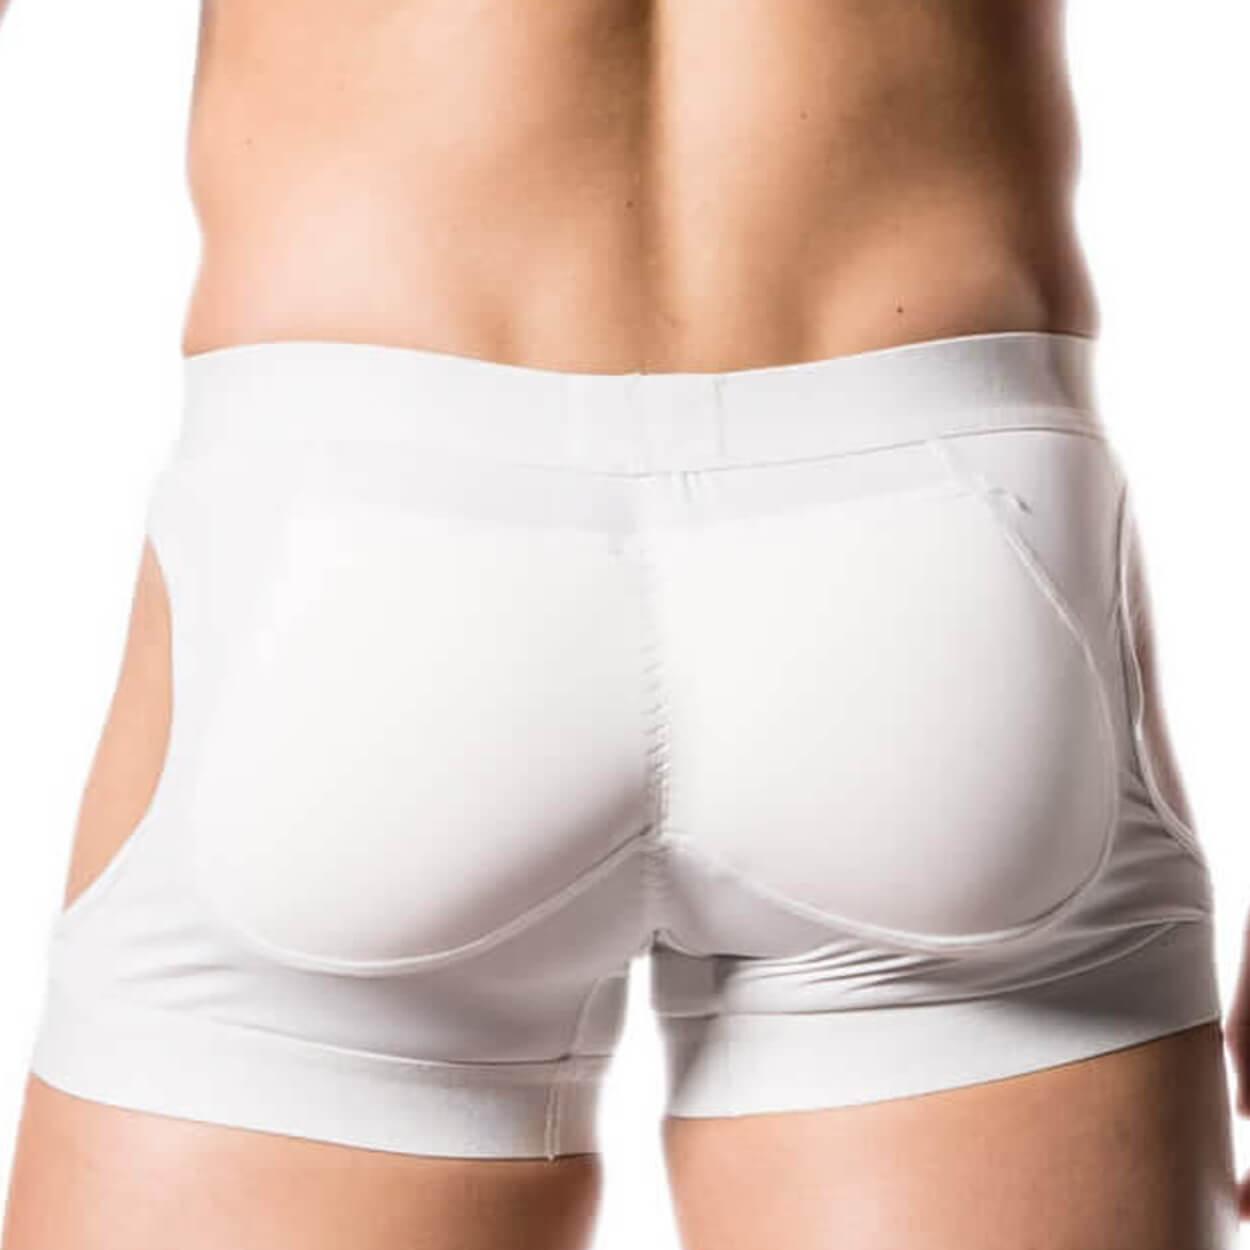 Hipsters Buttbooster Underwear( silicone pads Not included)